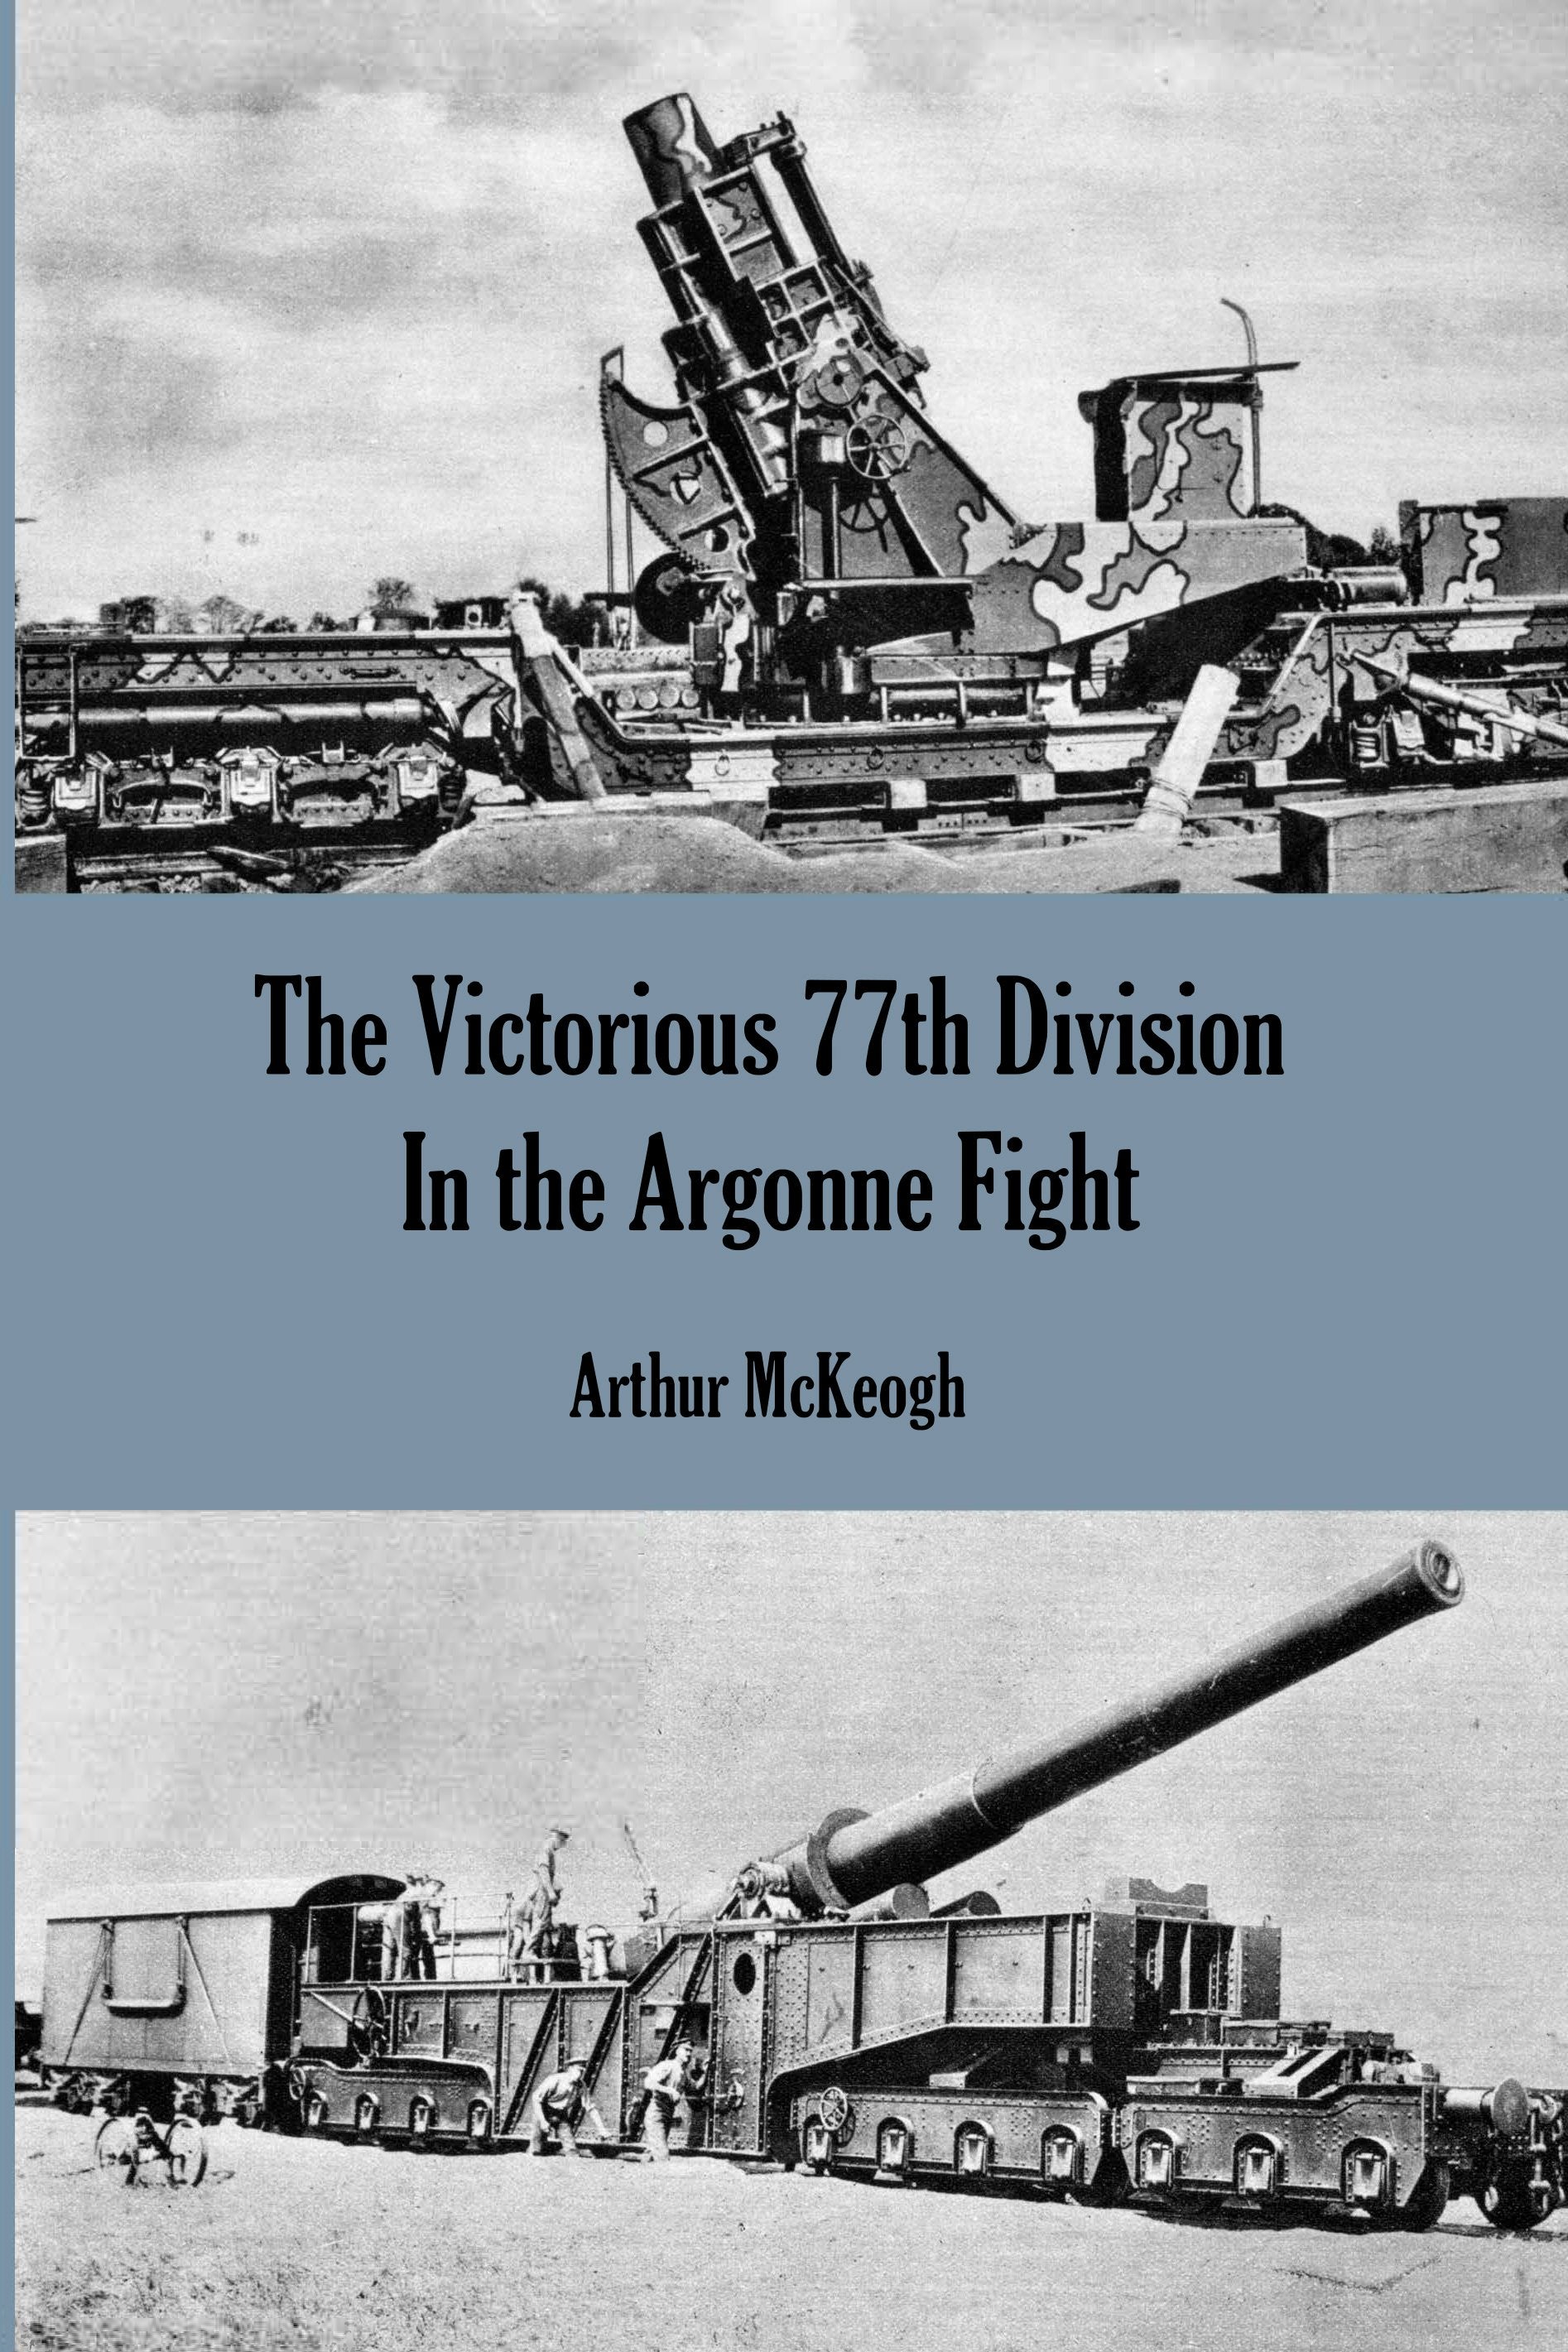 The Victorious 77th Division In the Argonne Fight